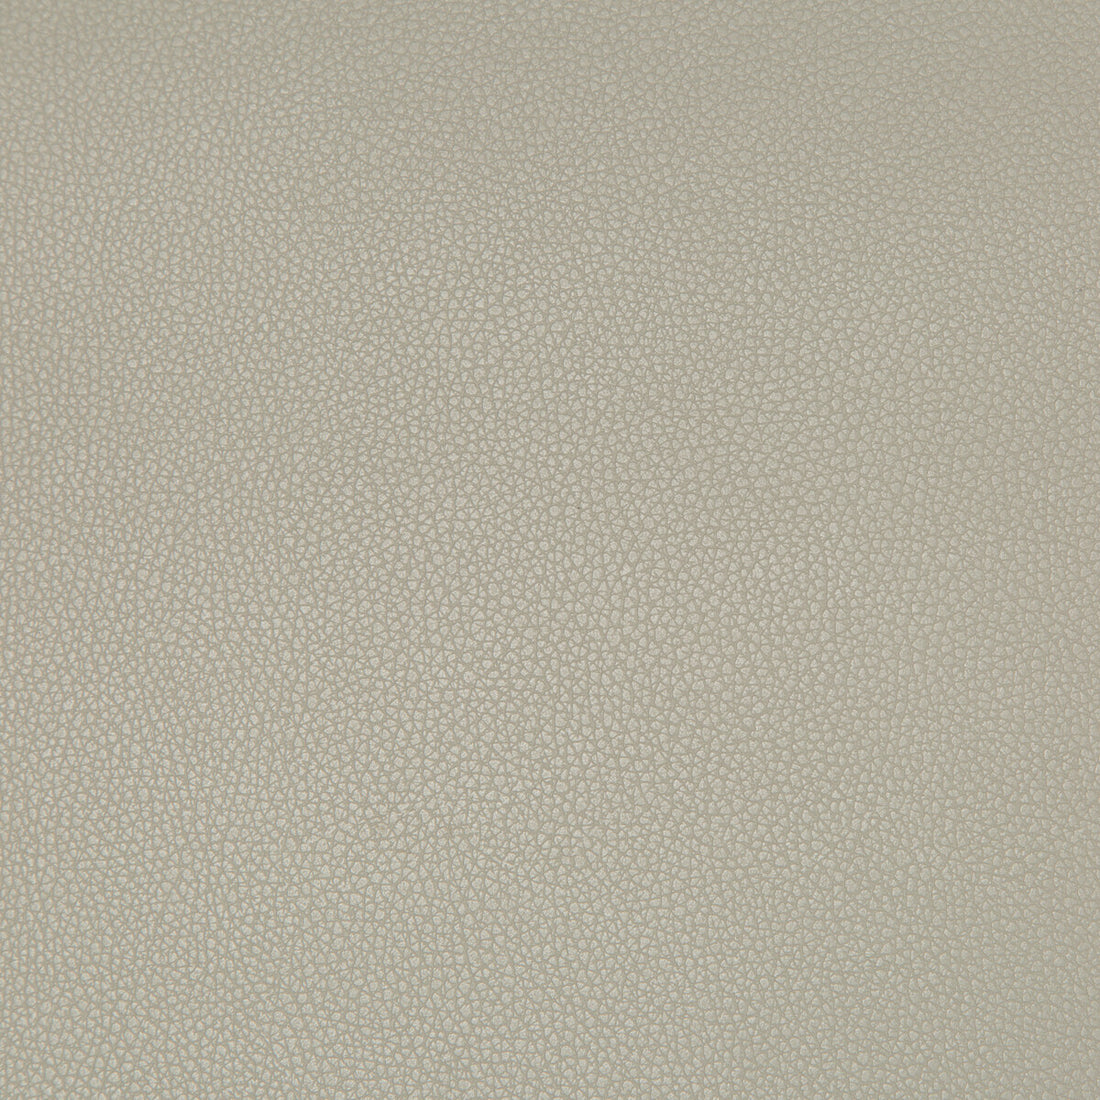 Syrus fabric in stingray color - pattern SYRUS.1121.0 - by Kravet Contract